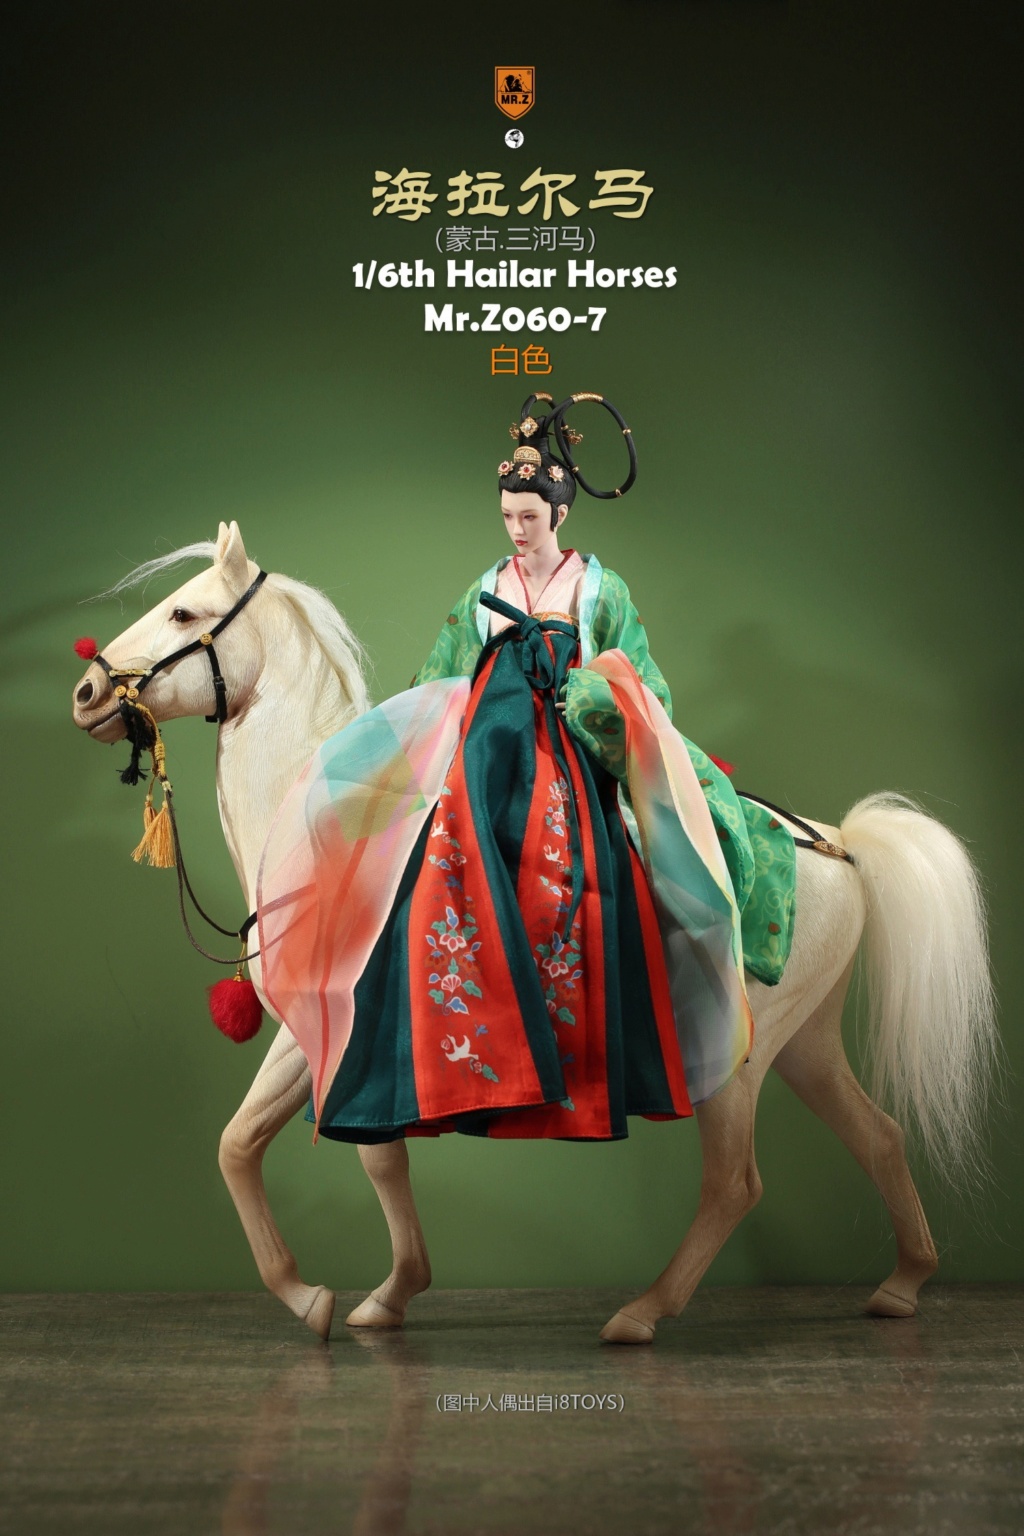 accessory - NEW PRODUCT: Mr. Z: Hailar Horse (7 color options) 14302010